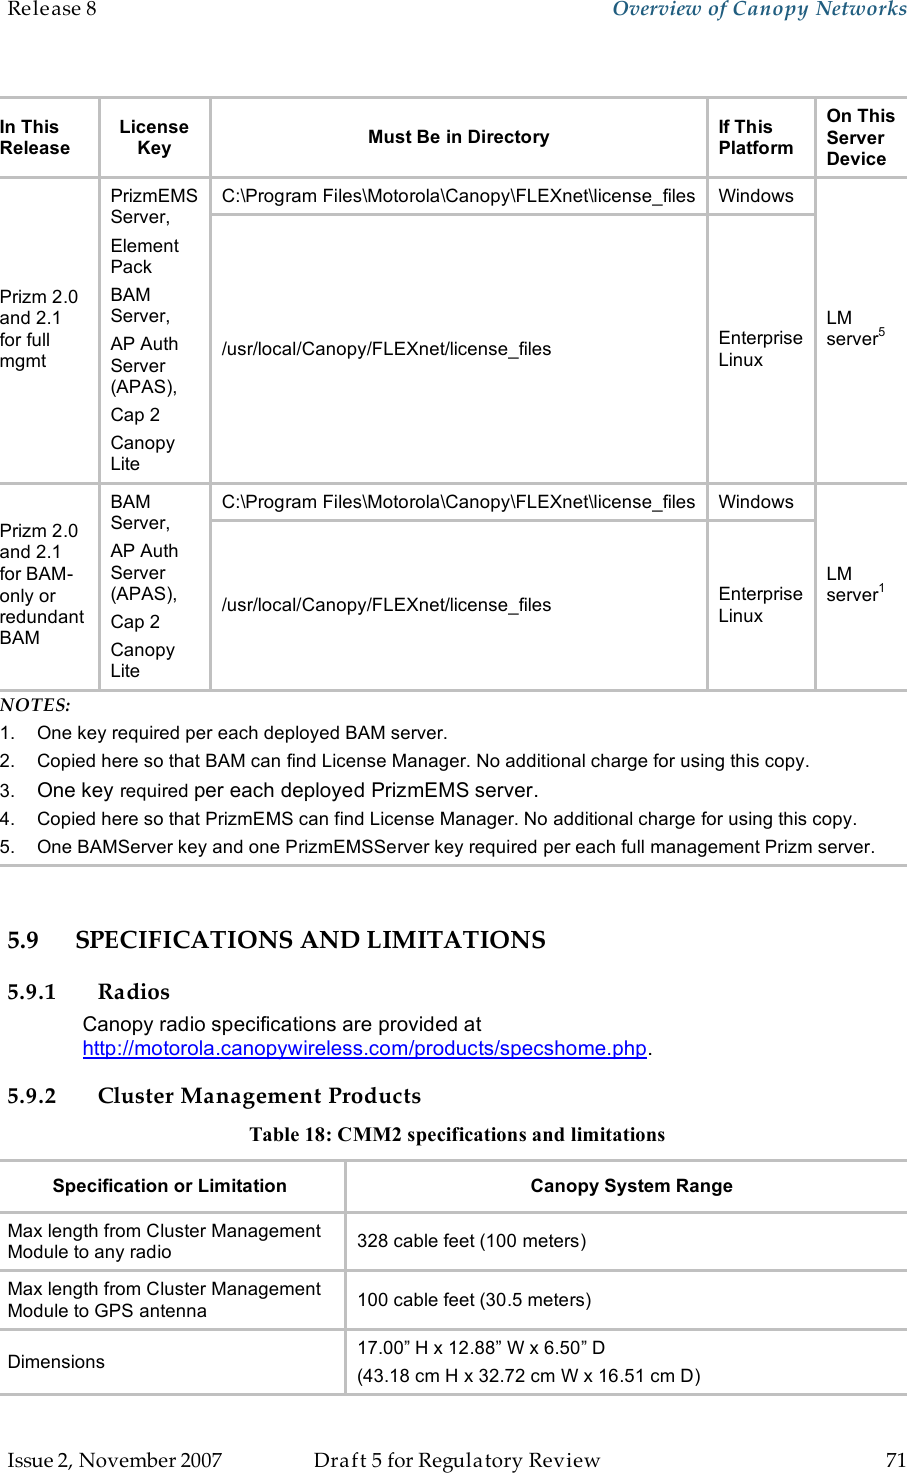 Release 8    Overview of Canopy Networks                  March 200                  Through Software Release 6.   Issue 2, November 2007  Draft 5 for Regulatory Review  71     In This Release License Key Must Be in Directory If This Platform On This Server Device C:\Program Files\Motorola\Canopy\FLEXnet\license_files Windows Prizm 2.0 and 2.1 for full mgmt PrizmEMS Server, Element Pack BAM Server, AP Auth Server (APAS), Cap 2 Canopy Lite /usr/local/Canopy/FLEXnet/license_files Enterprise Linux LM server5 C:\Program Files\Motorola\Canopy\FLEXnet\license_files Windows Prizm 2.0 and 2.1 for BAM-only or redundant BAM BAM Server, AP Auth Server (APAS), Cap 2 Canopy Lite /usr/local/Canopy/FLEXnet/license_files Enterprise Linux LM server1 NOTES: 1.  One key required per each deployed BAM server. 2.  Copied here so that BAM can find License Manager. No additional charge for using this copy. 3.  One key required per each deployed PrizmEMS server. 4.  Copied here so that PrizmEMS can find License Manager. No additional charge for using this copy. 5.  One BAMServer key and one PrizmEMSServer key required per each full management Prizm server.  5.9 SPECIFICATIONS AND LIMITATIONS 5.9.1 Radios Canopy radio specifications are provided at http://motorola.canopywireless.com/products/specshome.php. 5.9.2 Cluster Management Products Table 18: CMM2 specifications and limitations Specification or Limitation Canopy System Range Max length from Cluster Management Module to any radio 328 cable feet (100 meters) Max length from Cluster Management Module to GPS antenna 100 cable feet (30.5 meters) Dimensions 17.00” H x 12.88” W x 6.50” D  (43.18 cm H x 32.72 cm W x 16.51 cm D) 